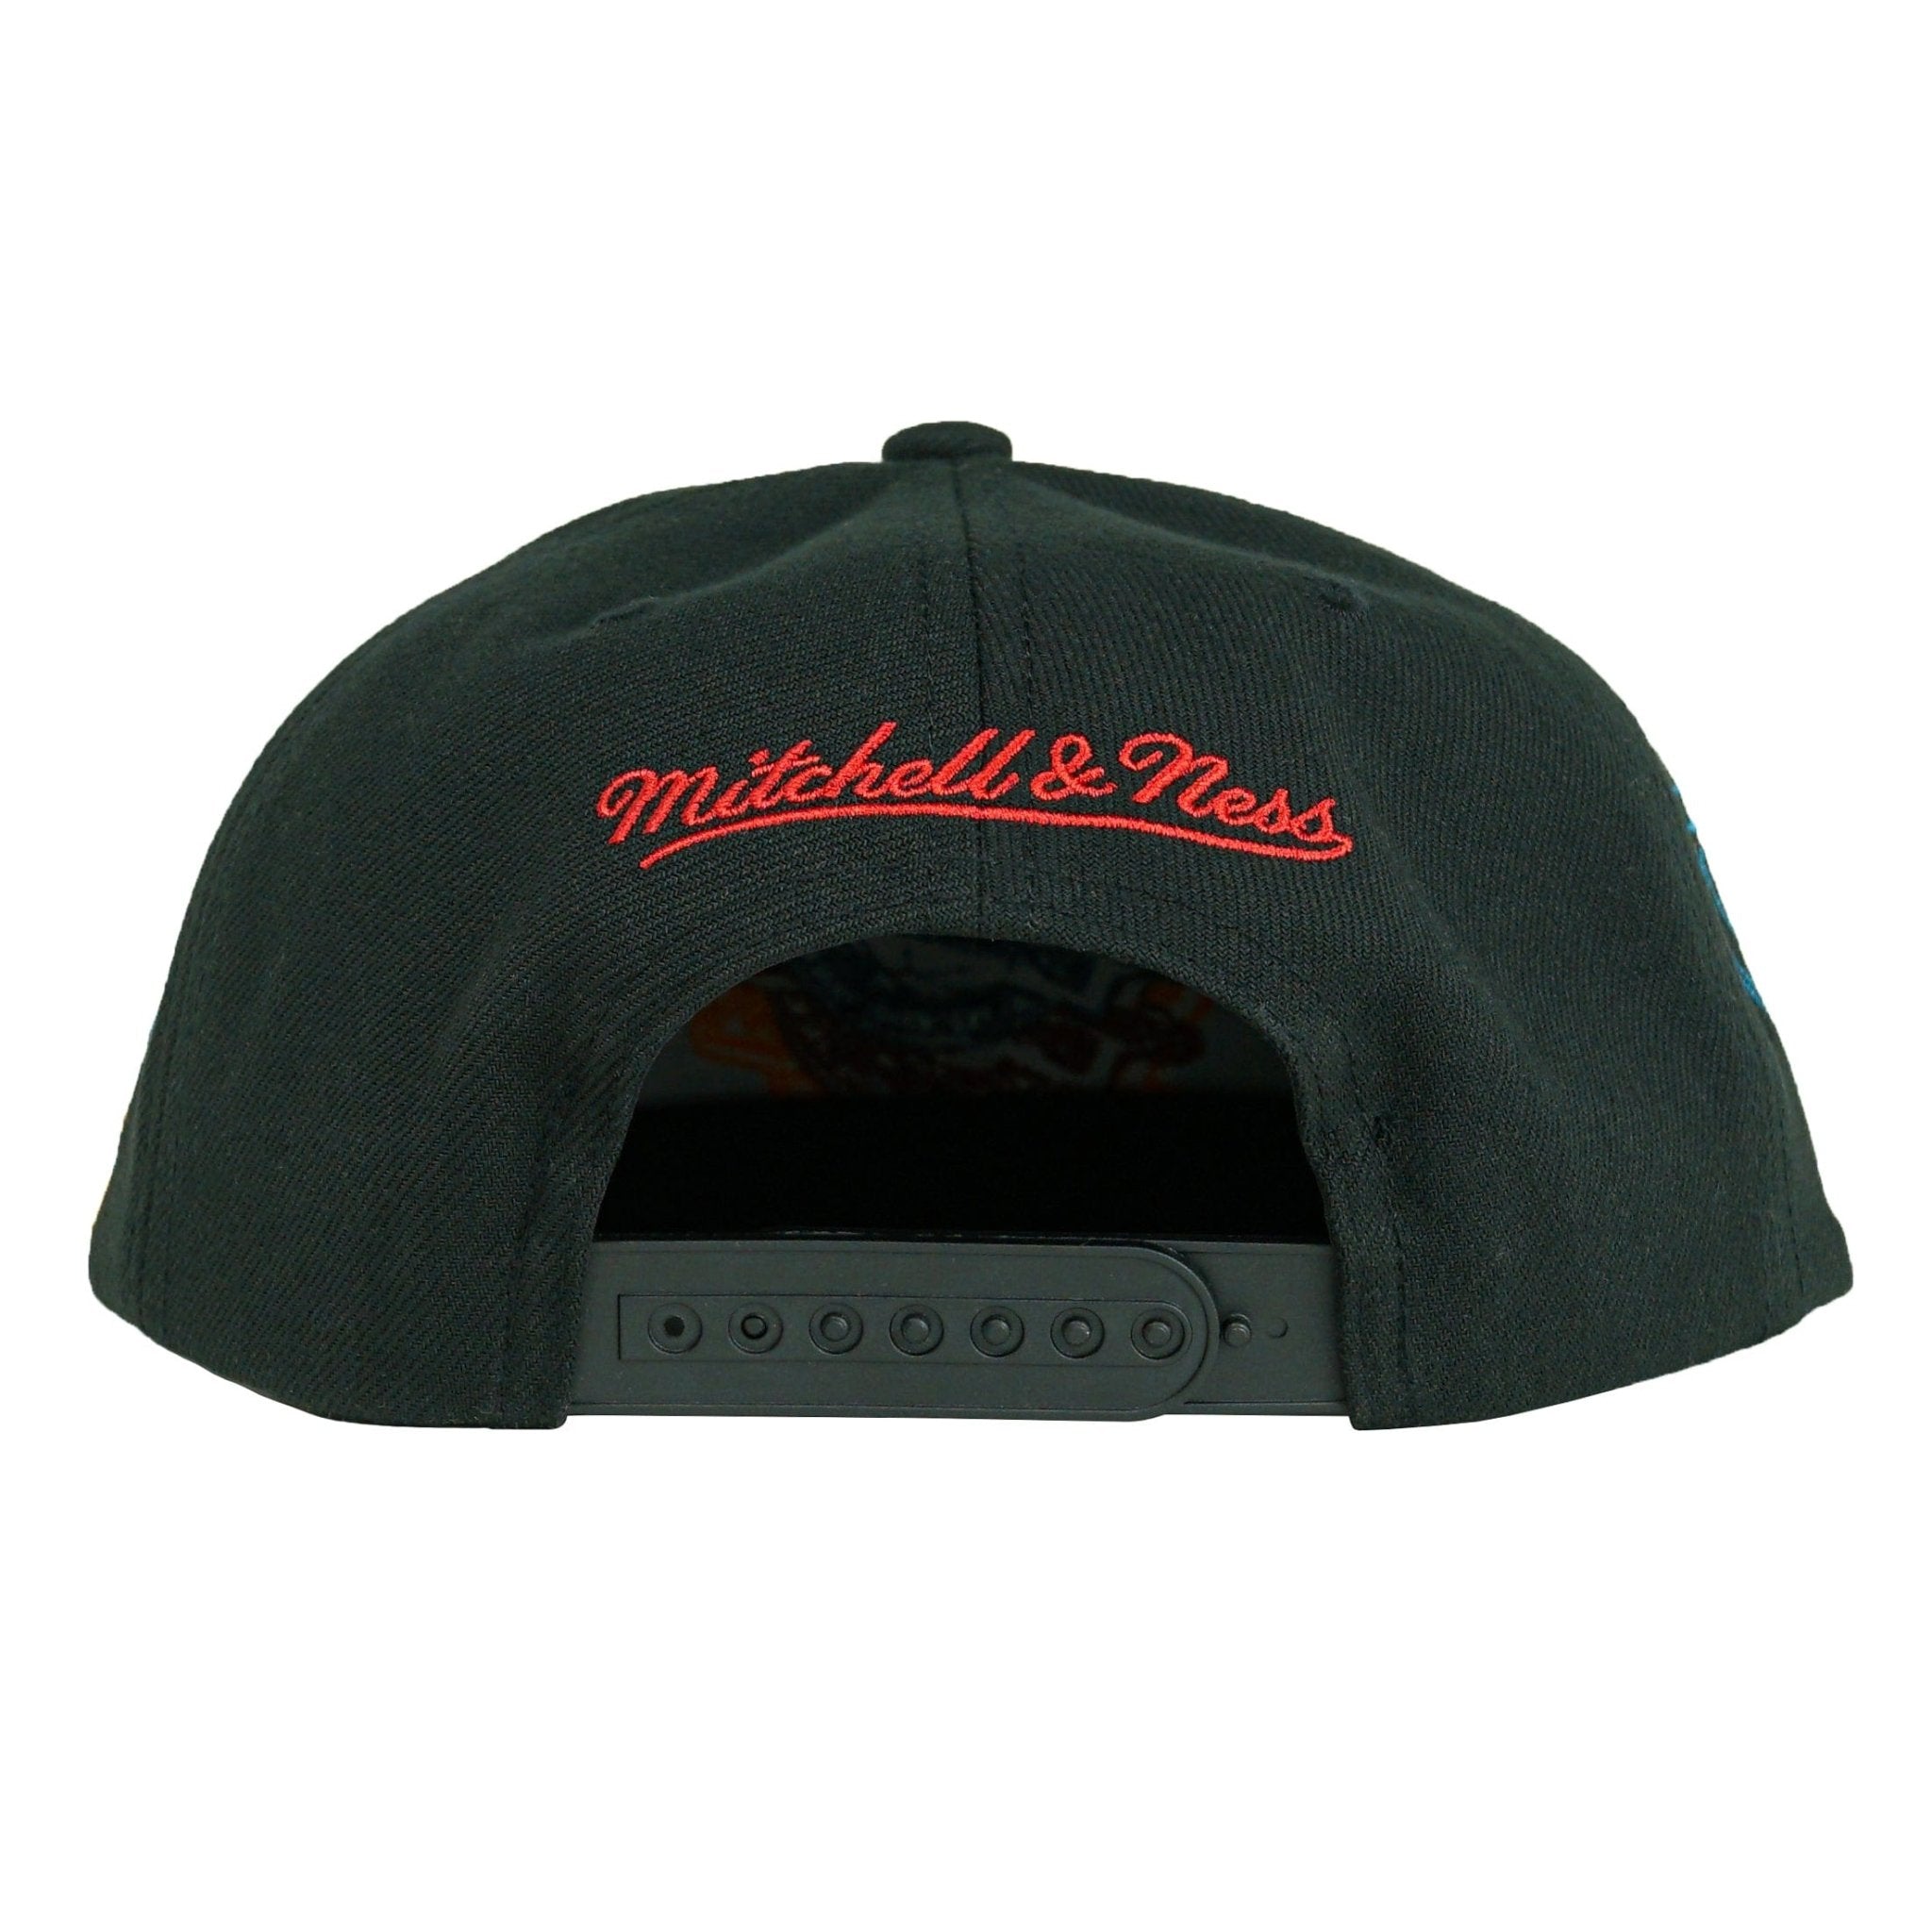 Detroit Pistons Drop It HWC Snapback Hat in black - Mitchell & Ness - State Of Flux